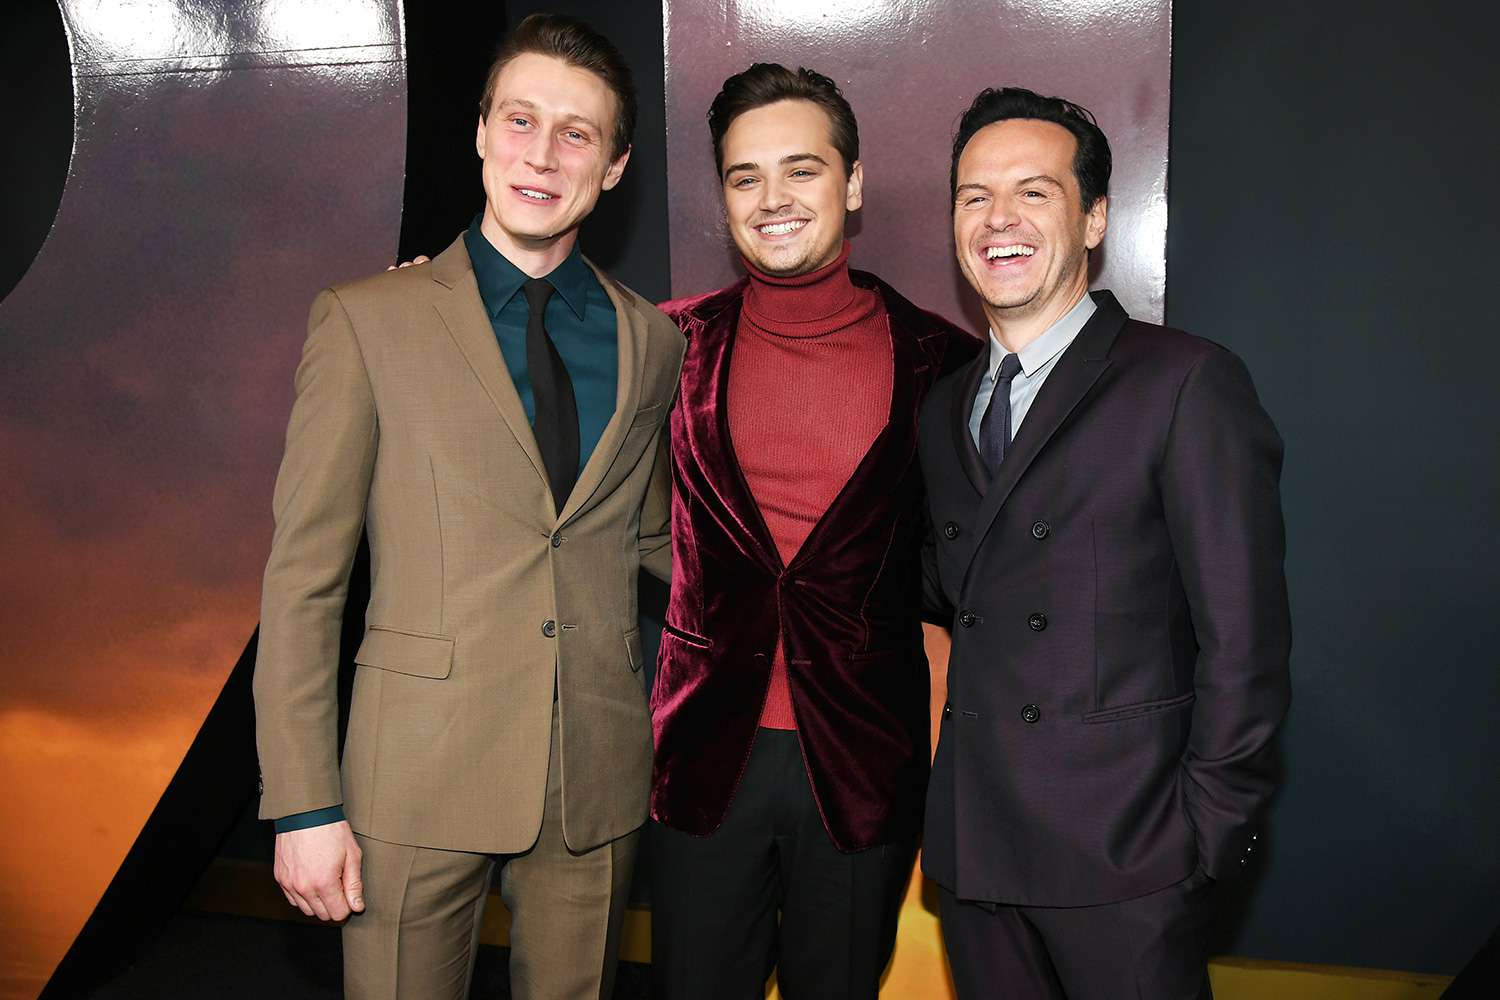 George MacKay, Dean-Charles Chapman and Actor Andrew Scott attend the premiere of Universal Pictures' "1917" at TCL Chinese Theatre on December 18, 2019 in Hollywood, California